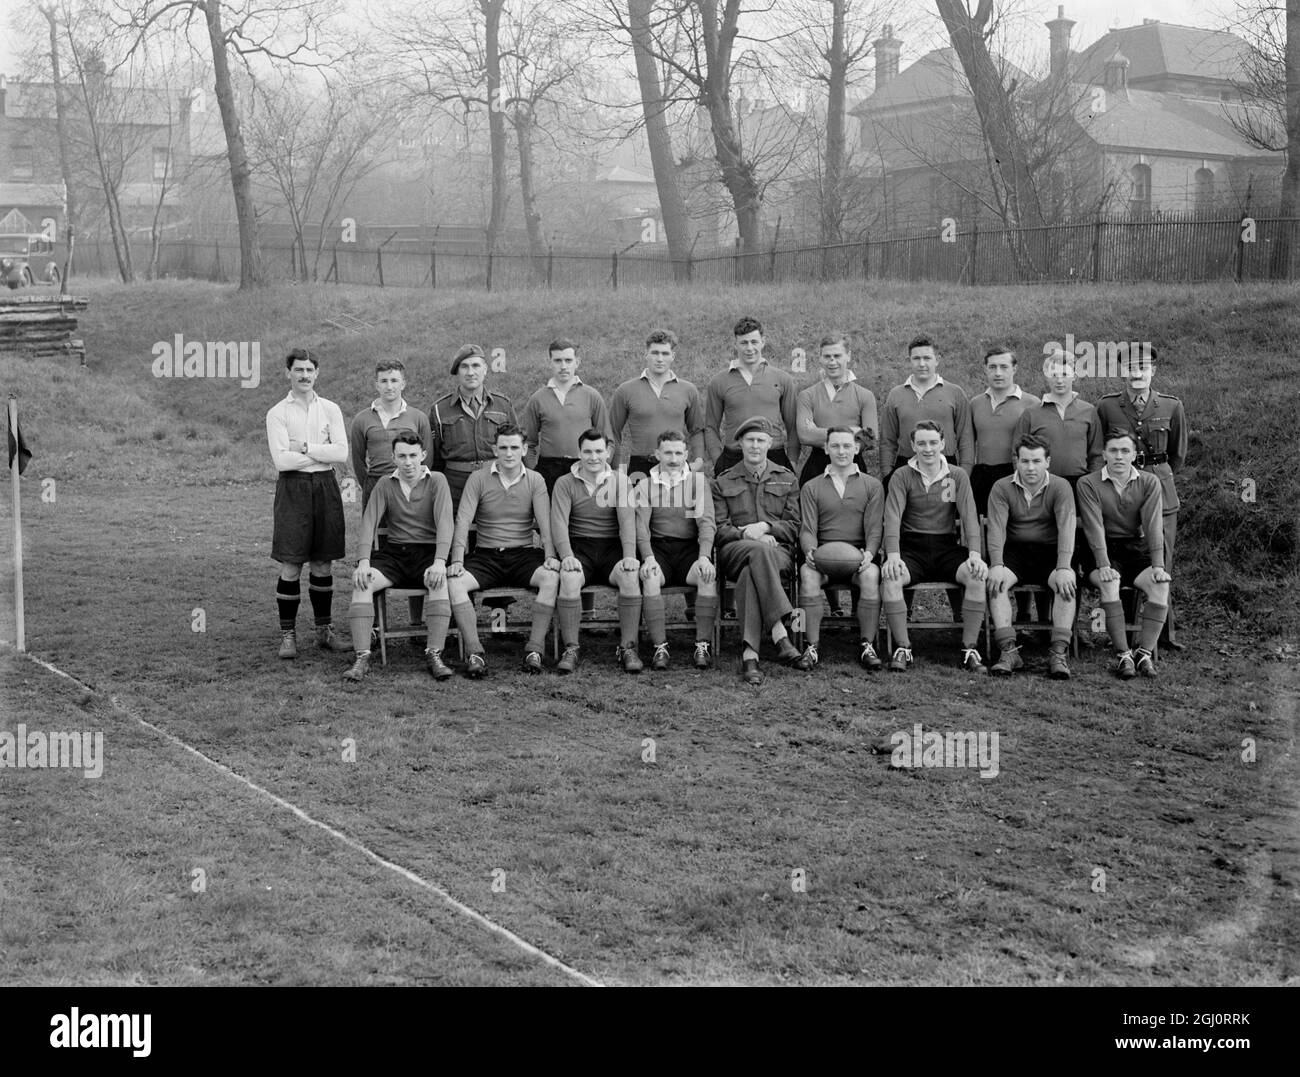 Rugby Match Royal Arsenal - Woolwich 16. März 1948 Stockfoto